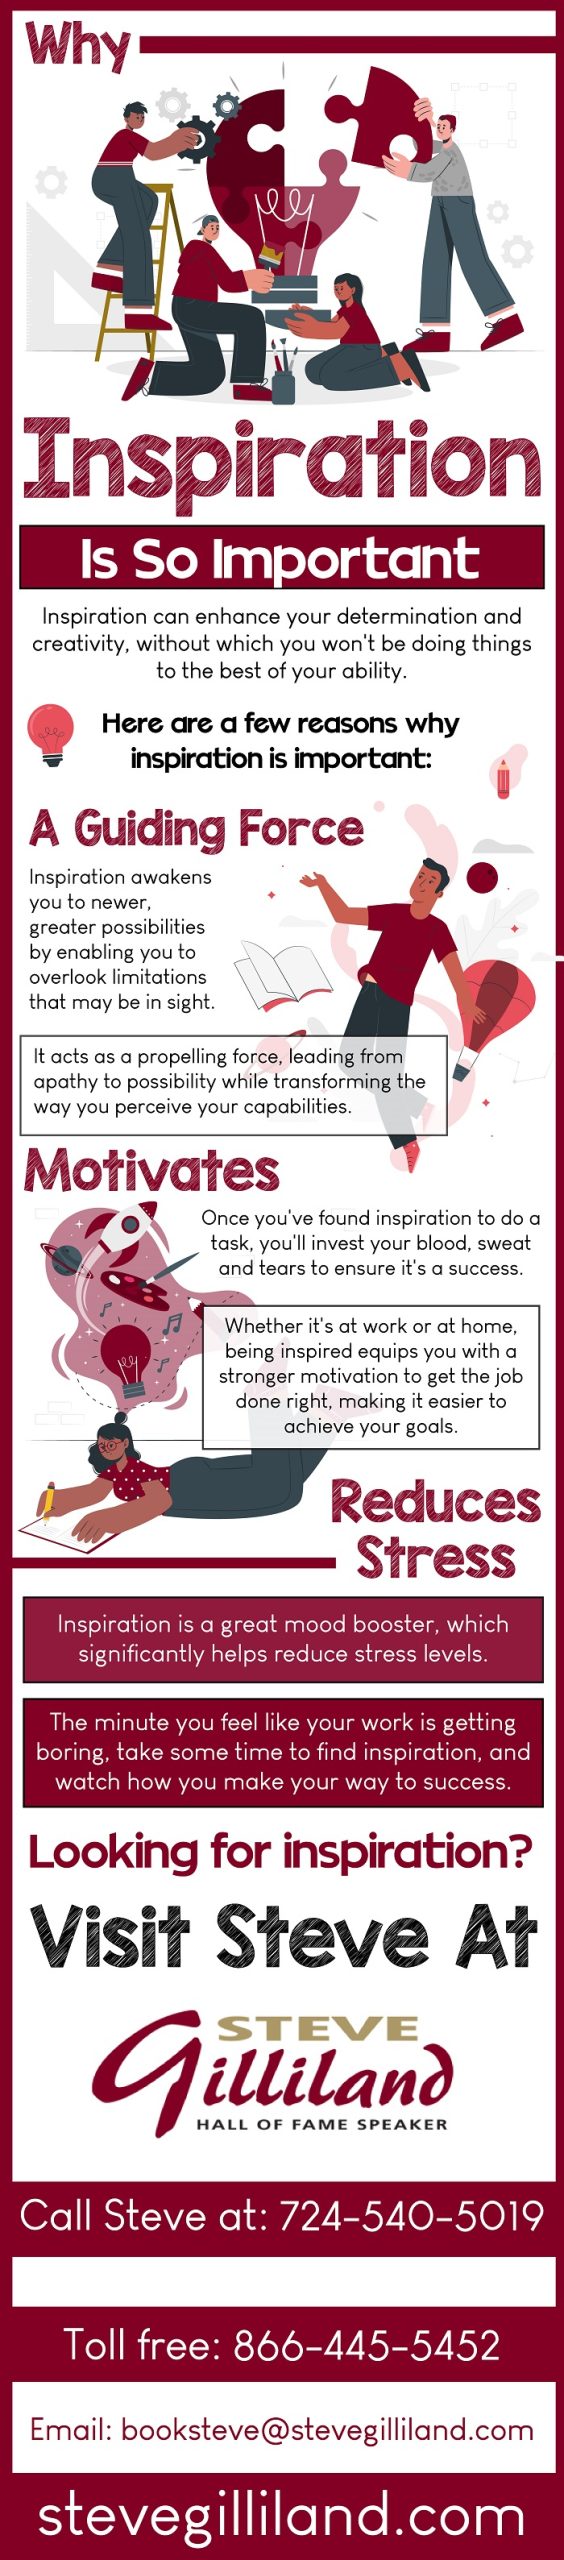 Why Inspiration Is So Important - An Infographic